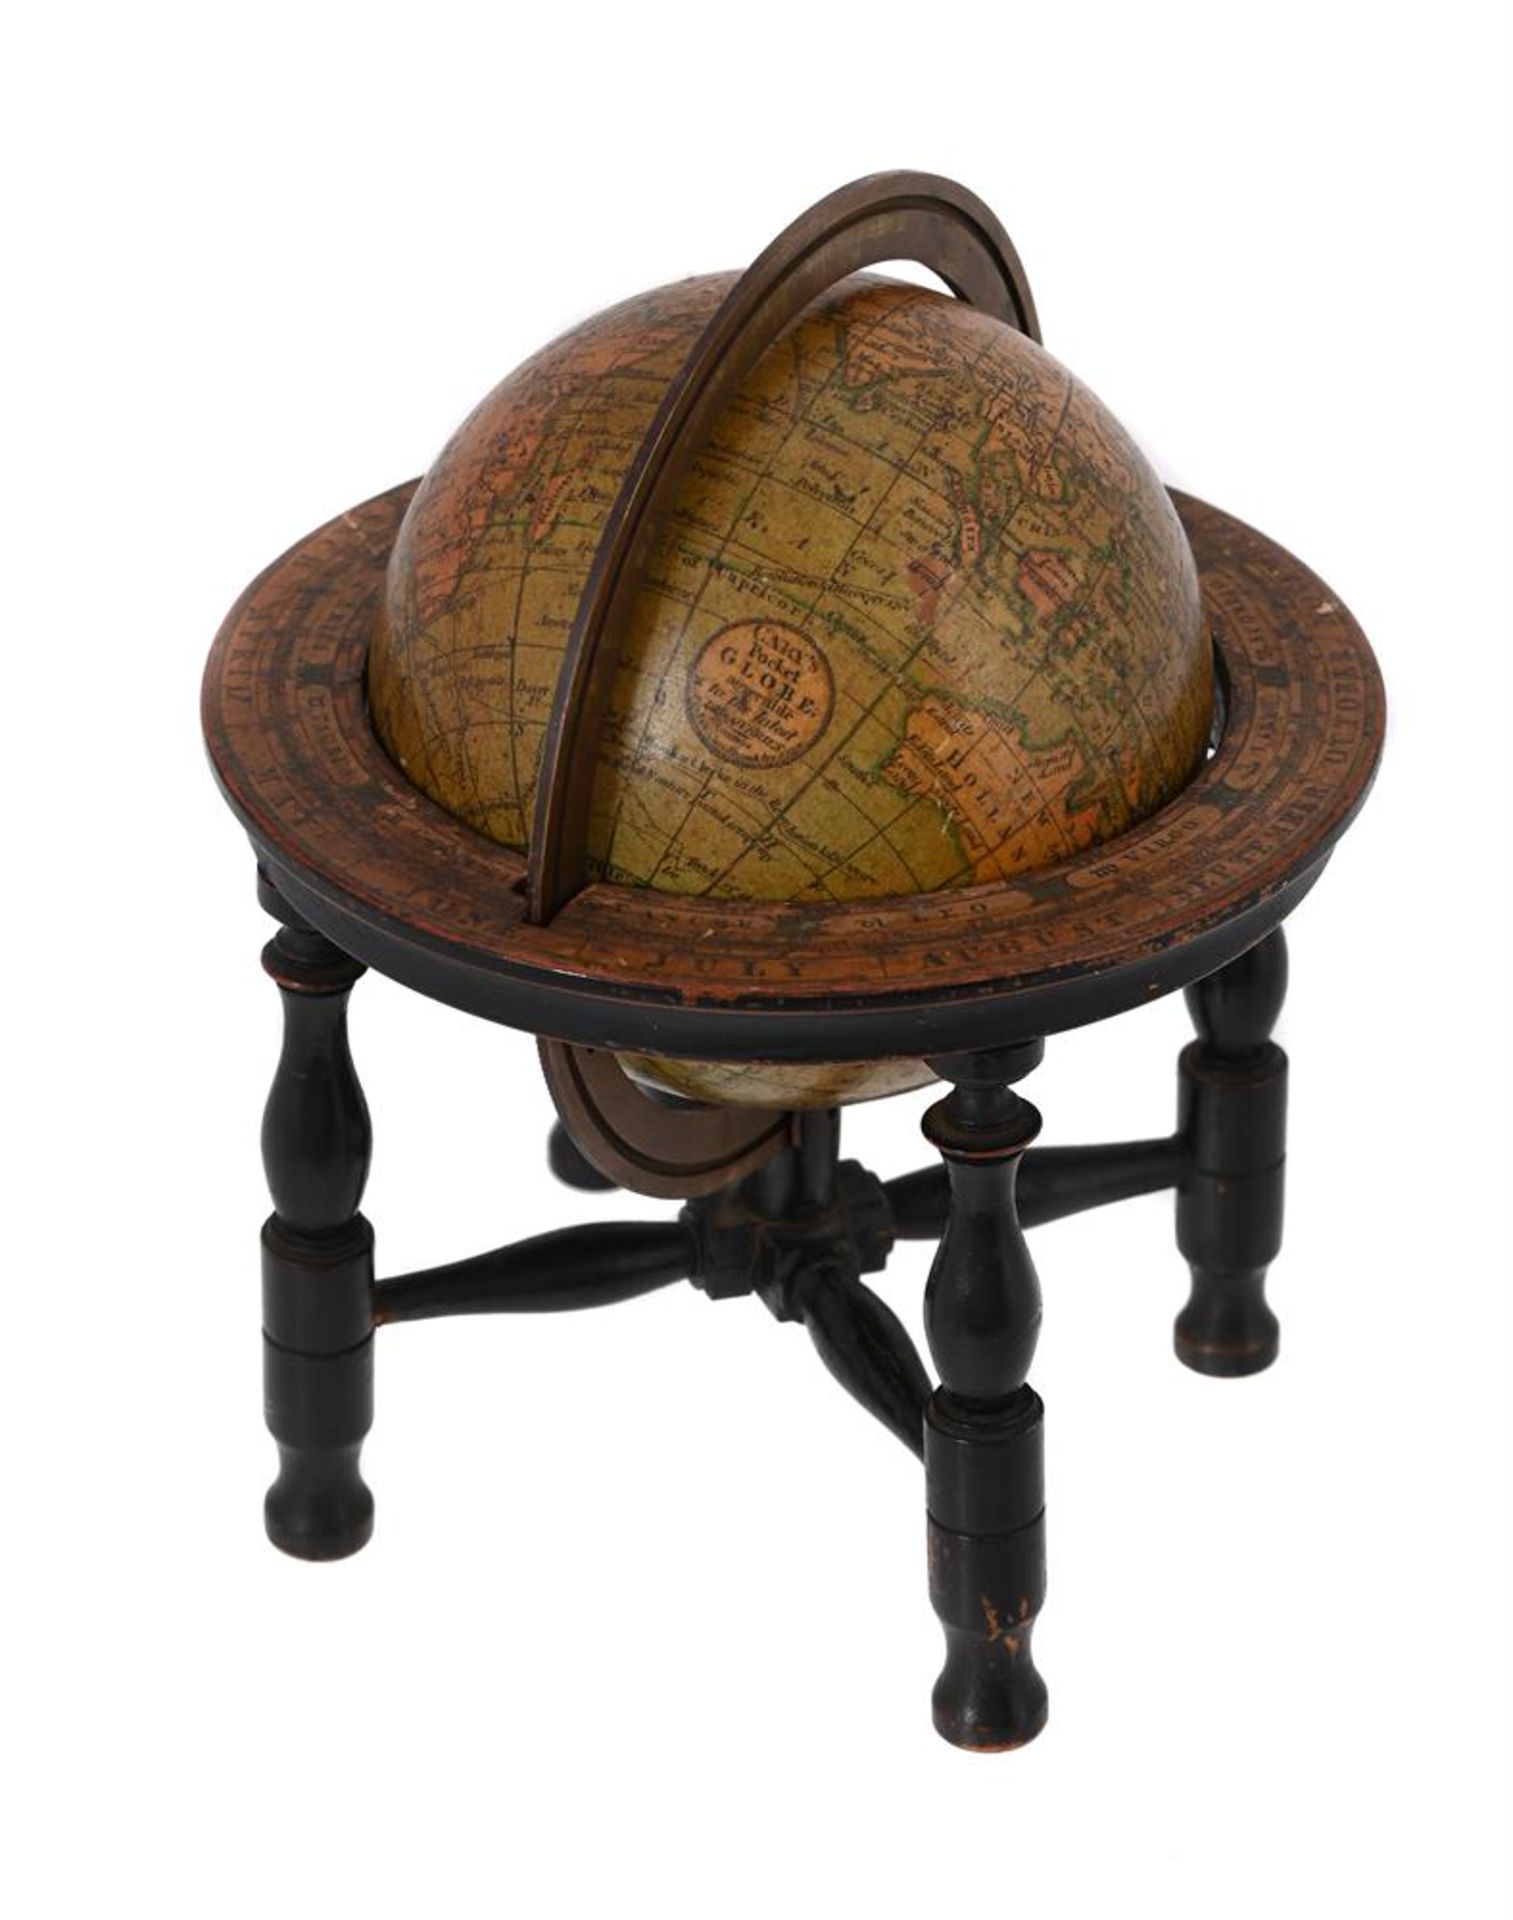 A FINE AND RARE PAIR OF GEORGE III MINIATURE THREE-INCH TABLE GLOBES - Image 4 of 6